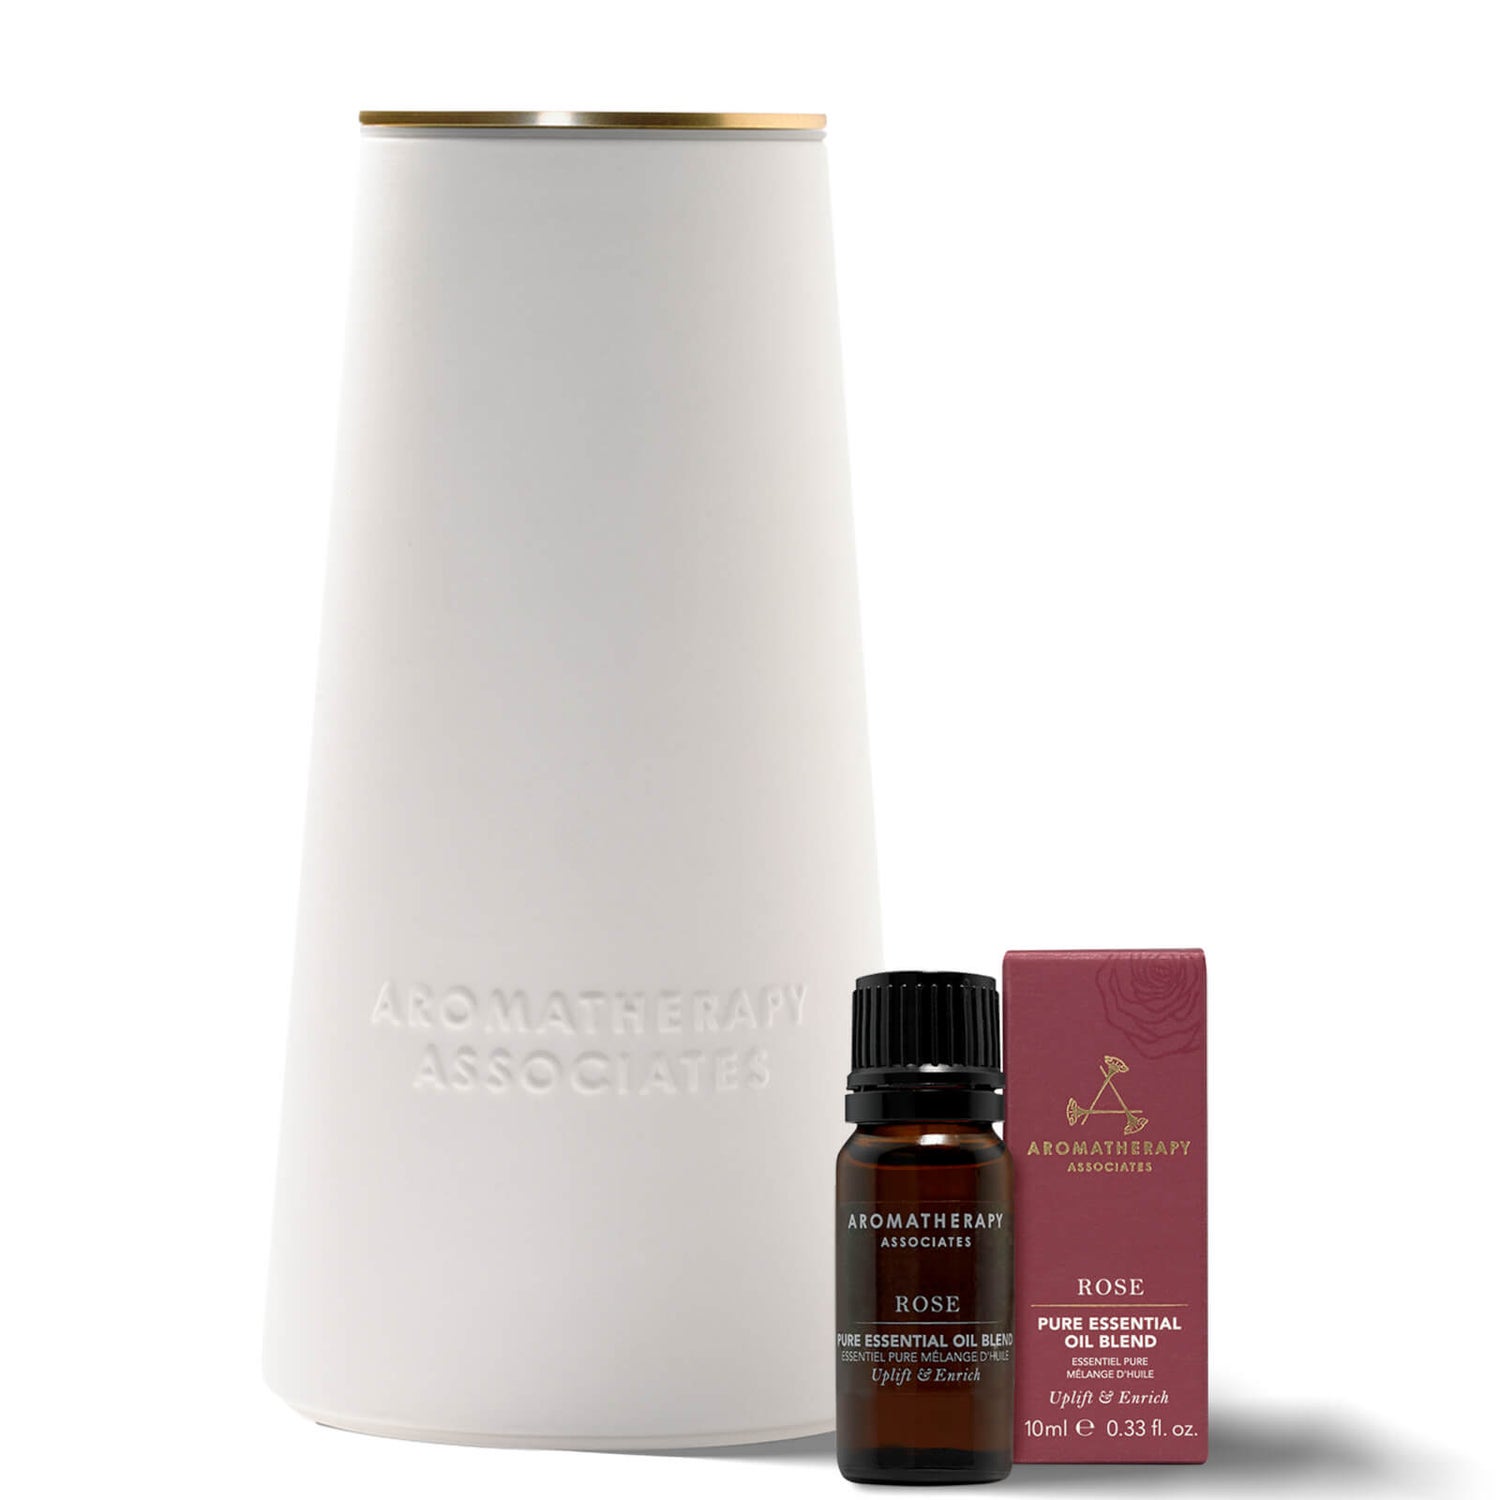 Aromatherapy Associates Uplifting Rose Home Wellbeing Collection (Worth £145.00)